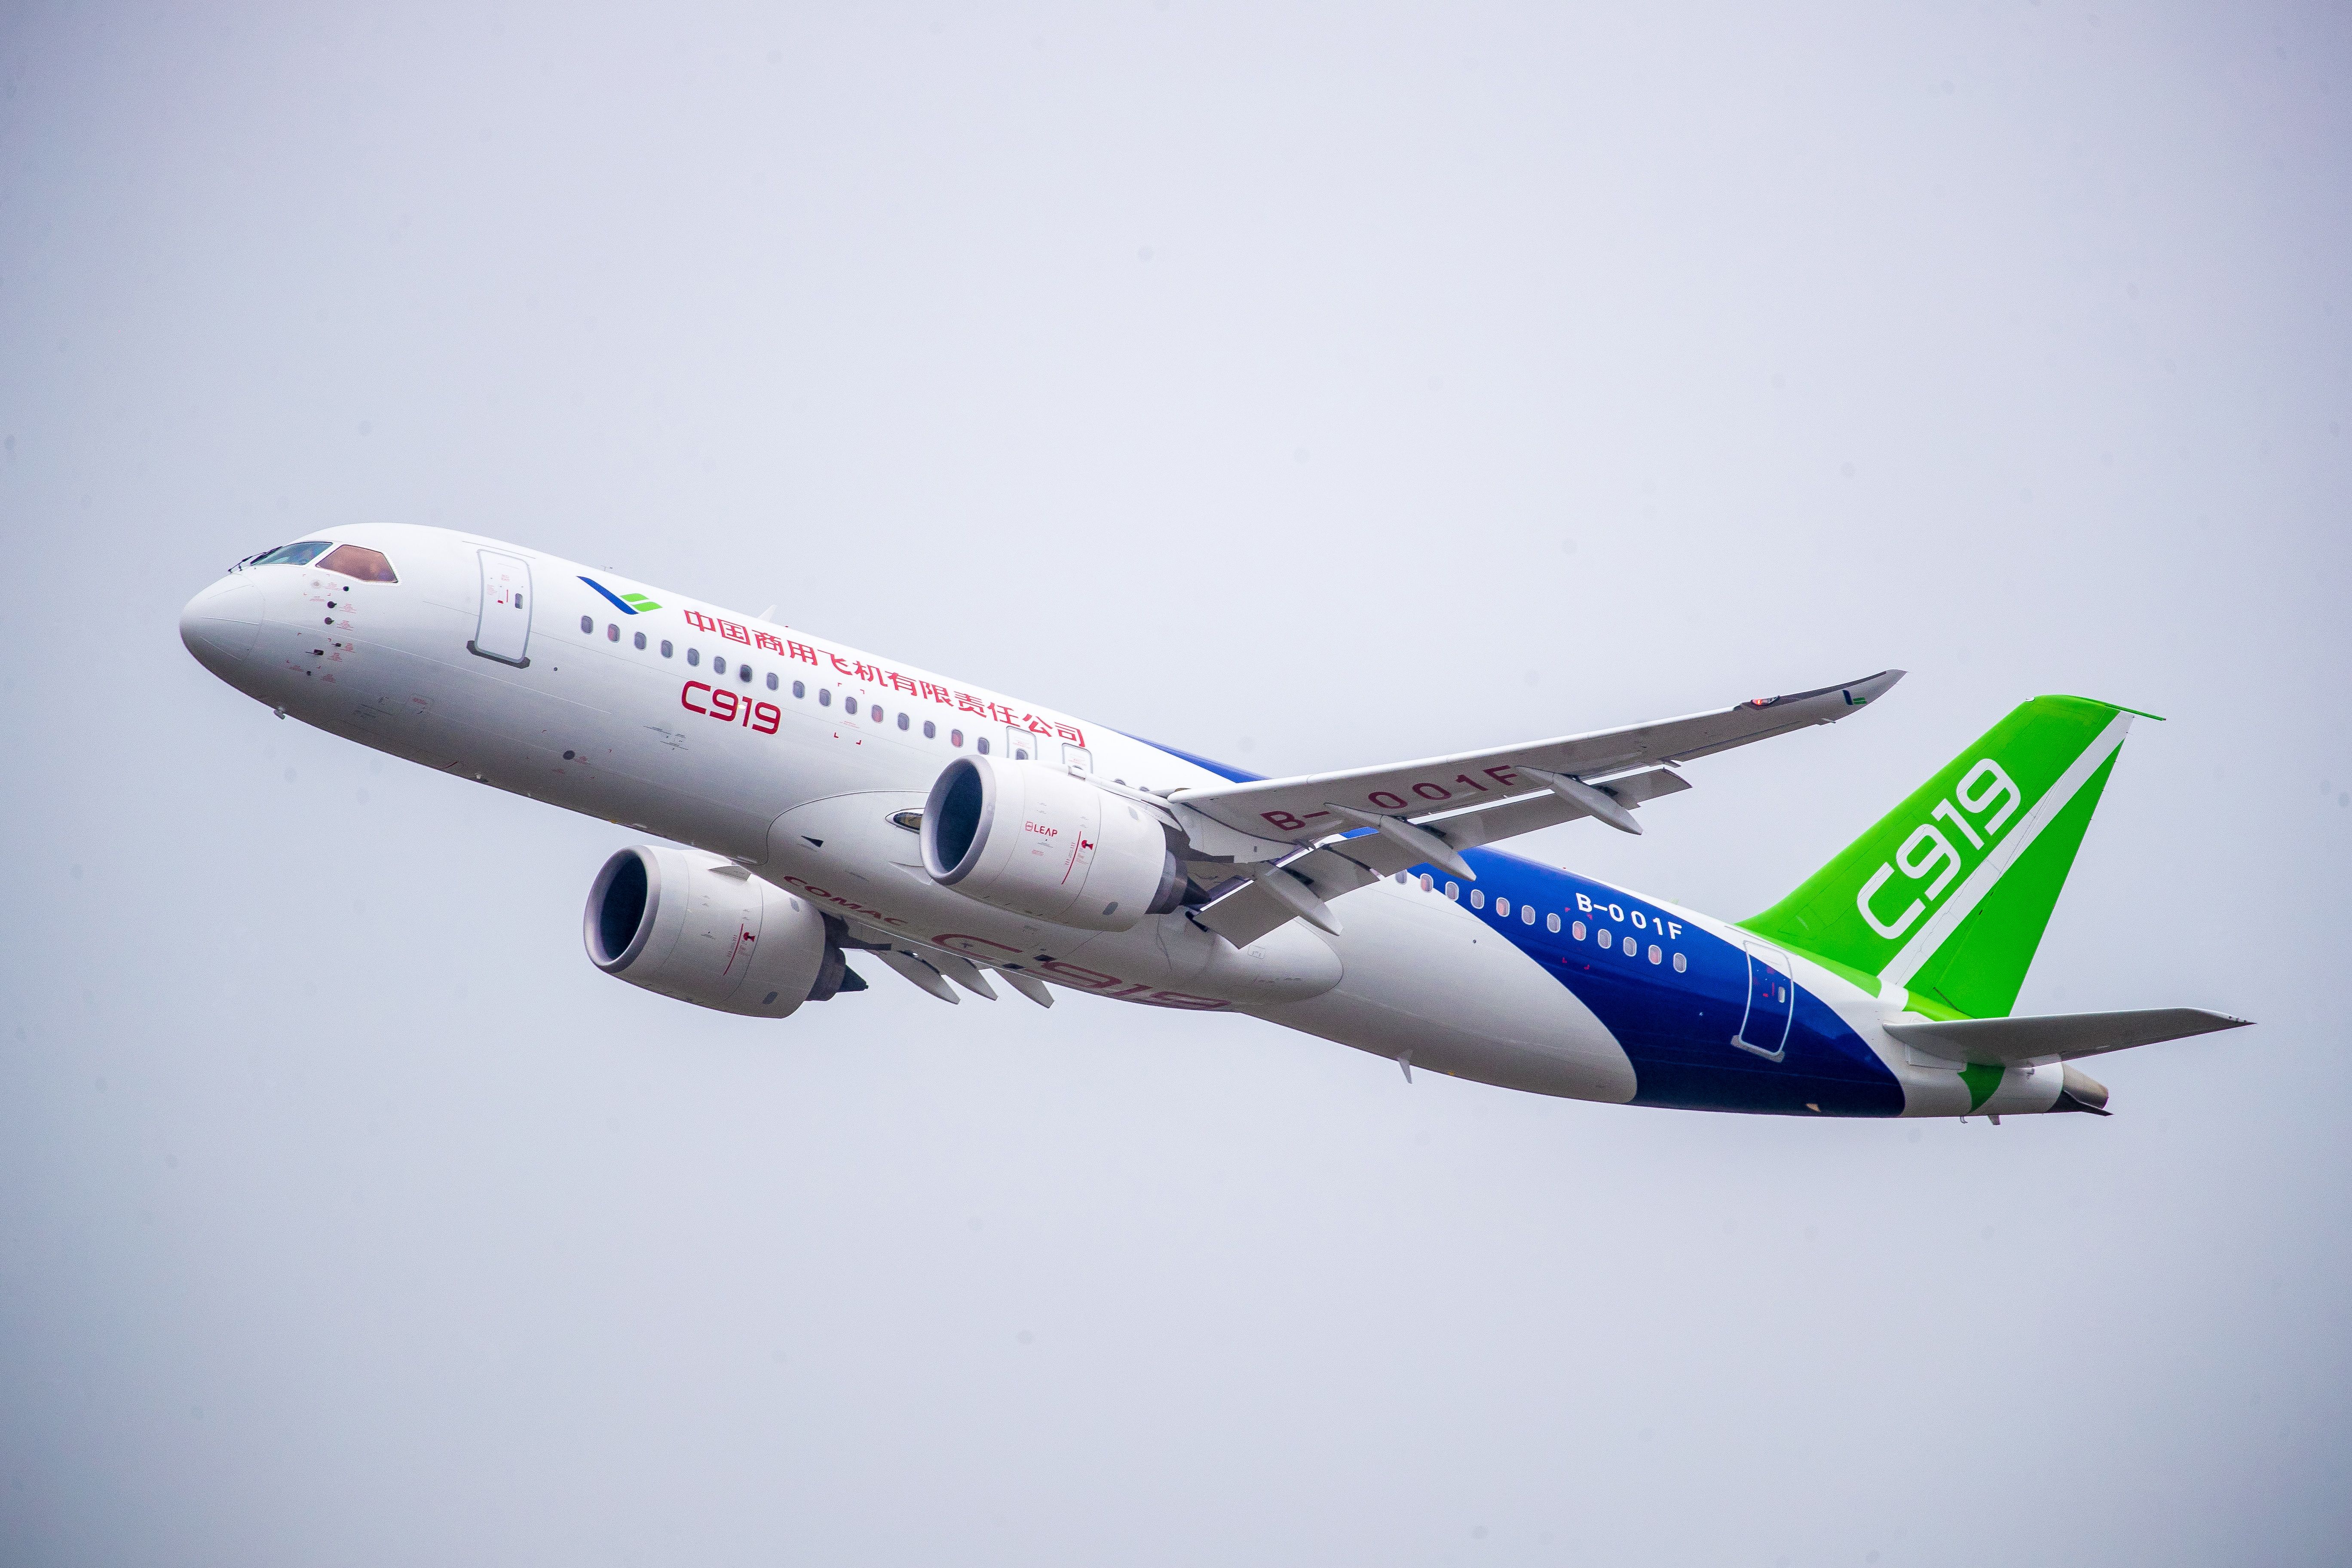 C919 in the air